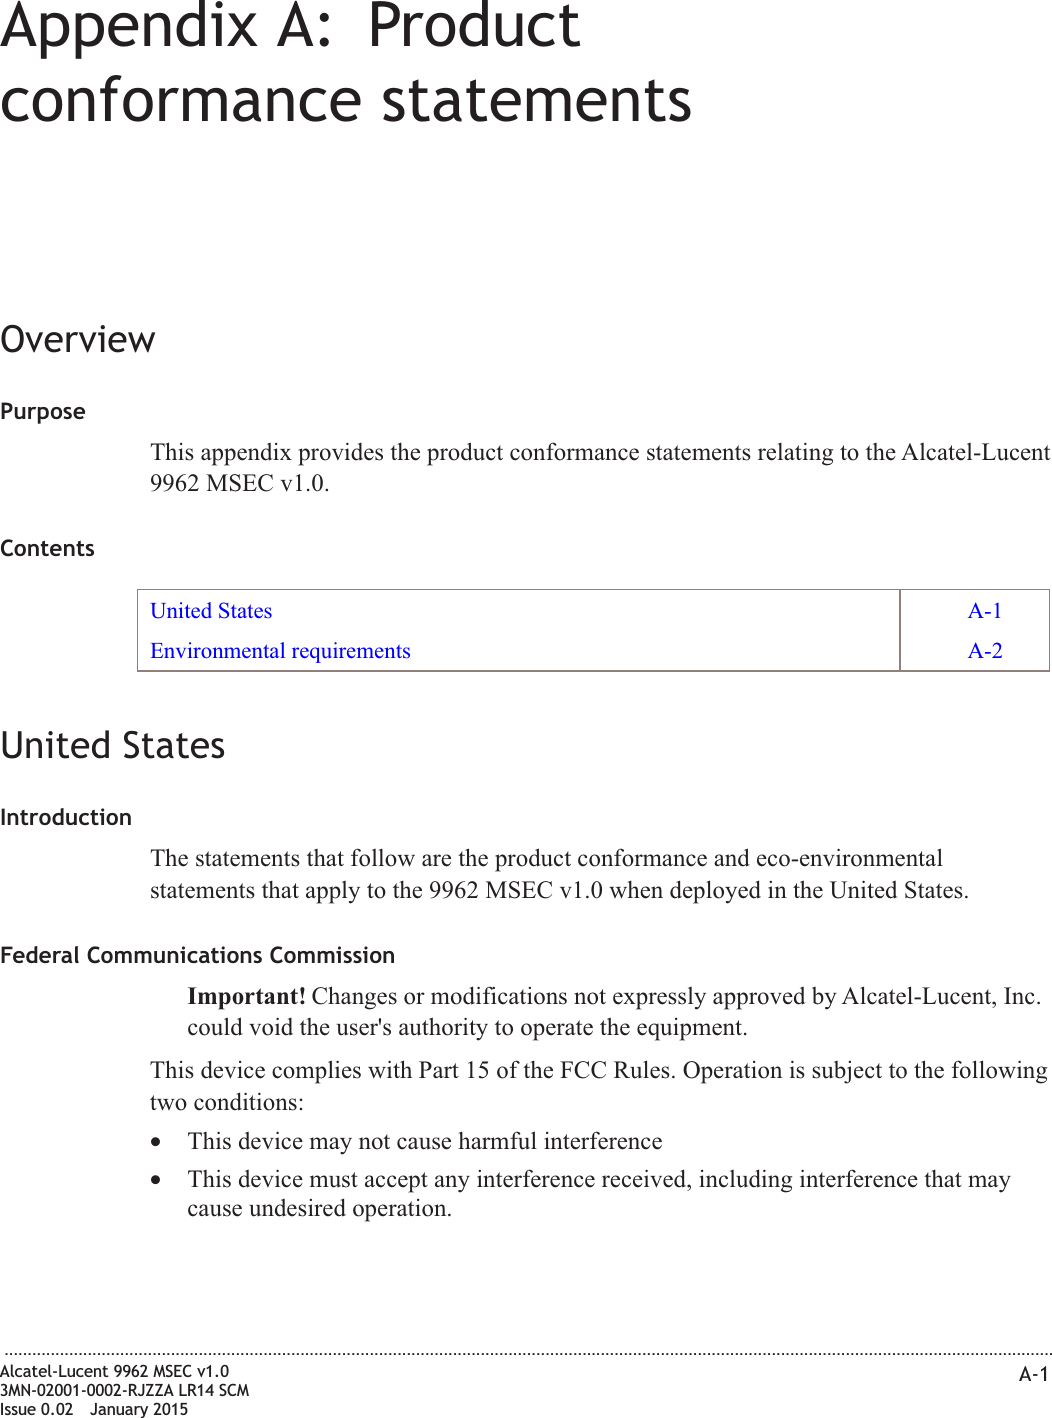 Appendix A: Productconformance statementsOverviewPurposeThis appendix provides the product conformance statements relating to the Alcatel-Lucent9962 MSEC v1.0.ContentsUnited States A-1Environmental requirements A-2United StatesIntroductionThe statements that follow are the product conformance and eco-environmentalstatements that apply to the 9962 MSEC v1.0 when deployed in the United States.Federal Communications CommissionImportant! Changes or modifications not expressly approved by Alcatel-Lucent, Inc.could void the user&apos;s authority to operate the equipment.This device complies with Part 15 of the FCC Rules. Operation is subject to the followingtwo conditions:•This device may not cause harmful interference•This device must accept any interference received, including interference that maycause undesired operation....................................................................................................................................................................................................................................Alcatel-Lucent 9962 MSEC v1.03MN-02001-0002-RJZZA LR14 SCMIssue 0.02 January 2015A-1DRAFTDRAFT